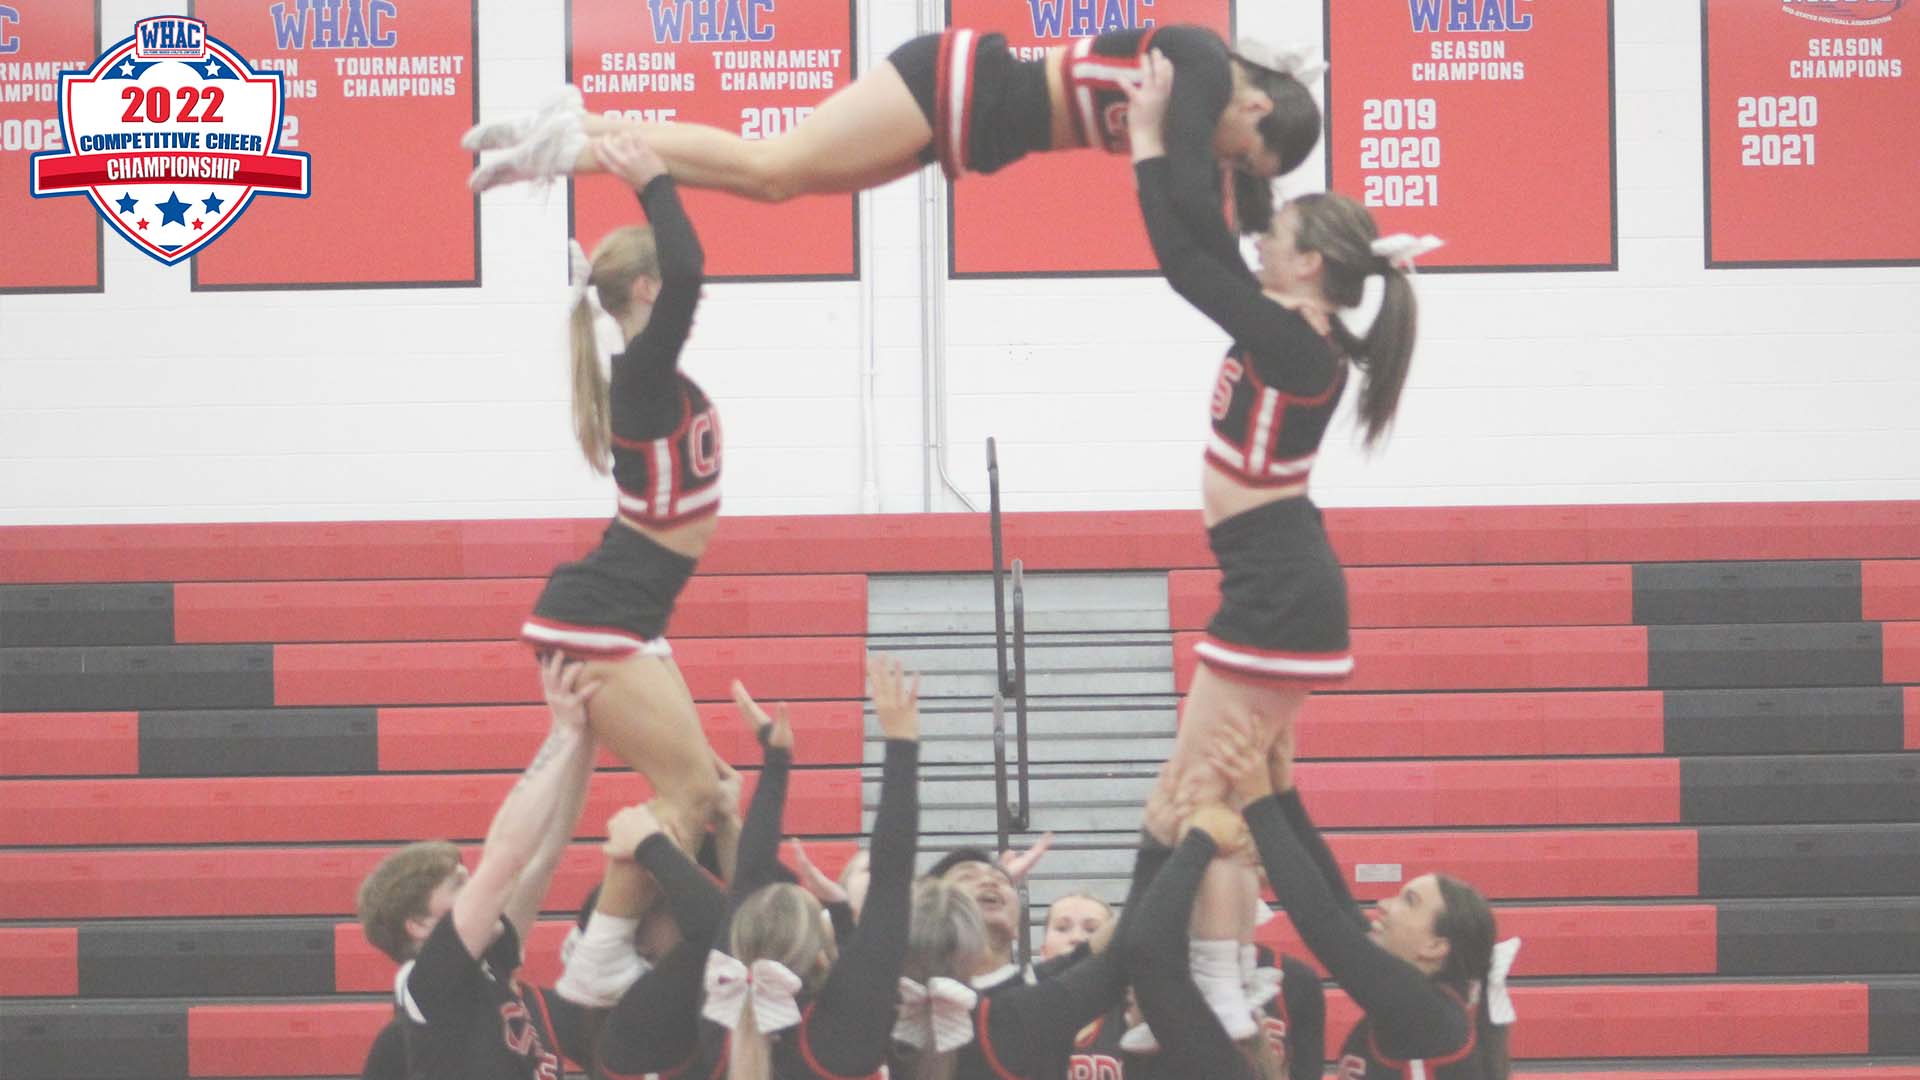 WHAC Preview: Cheer looks to earn fourth consecutive conference title at WHAC Championship